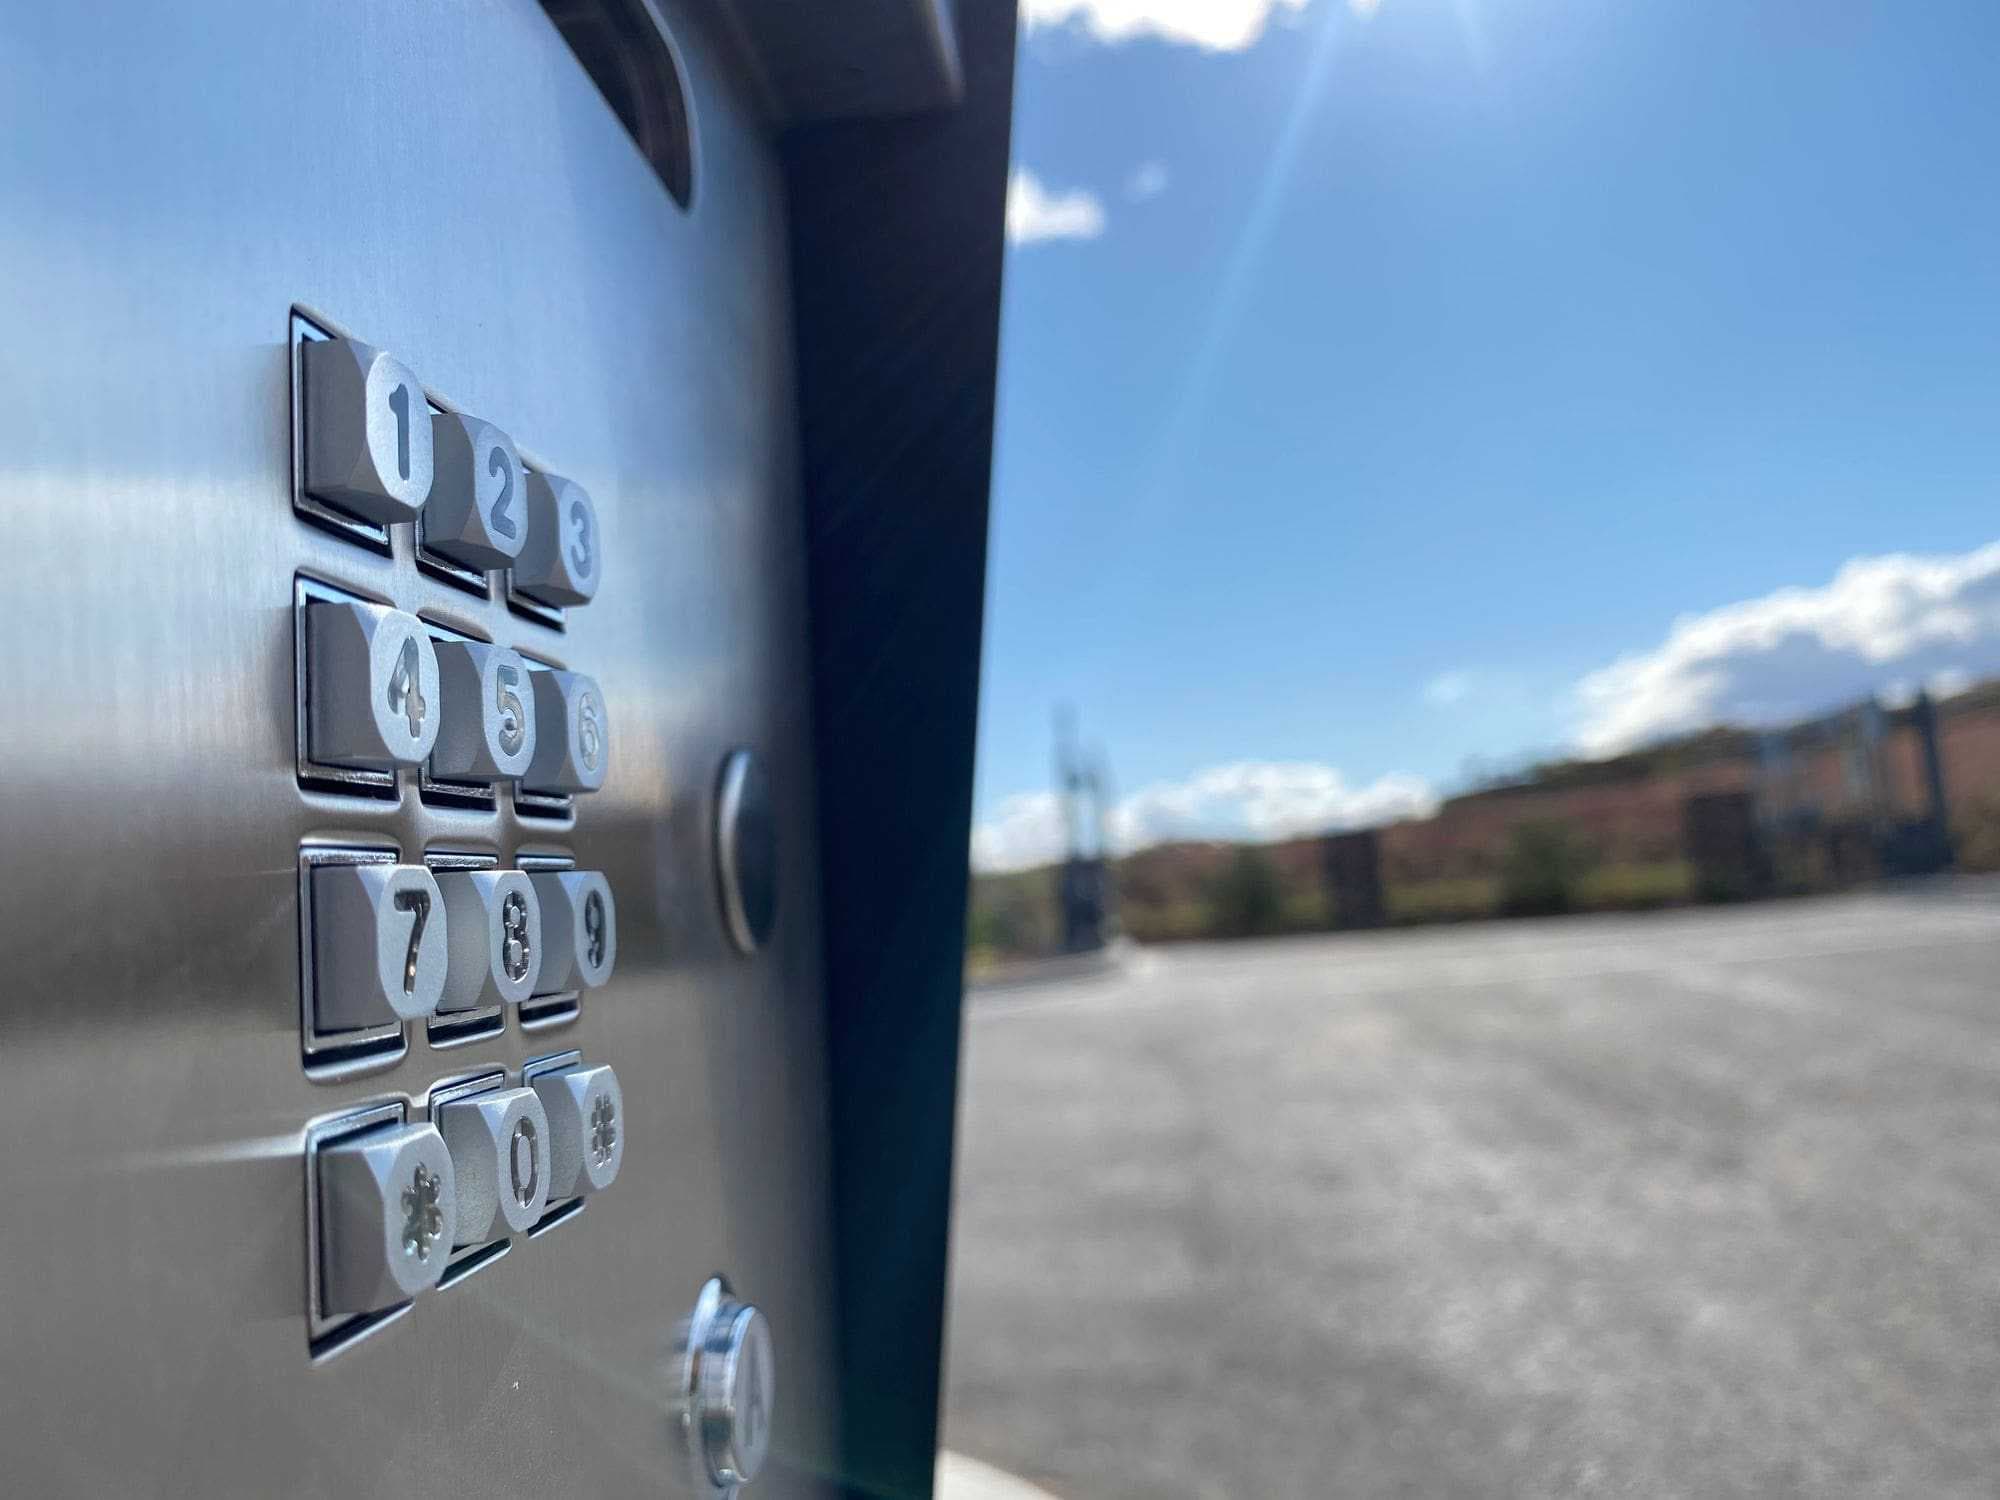 industrial keypad entry for access controls